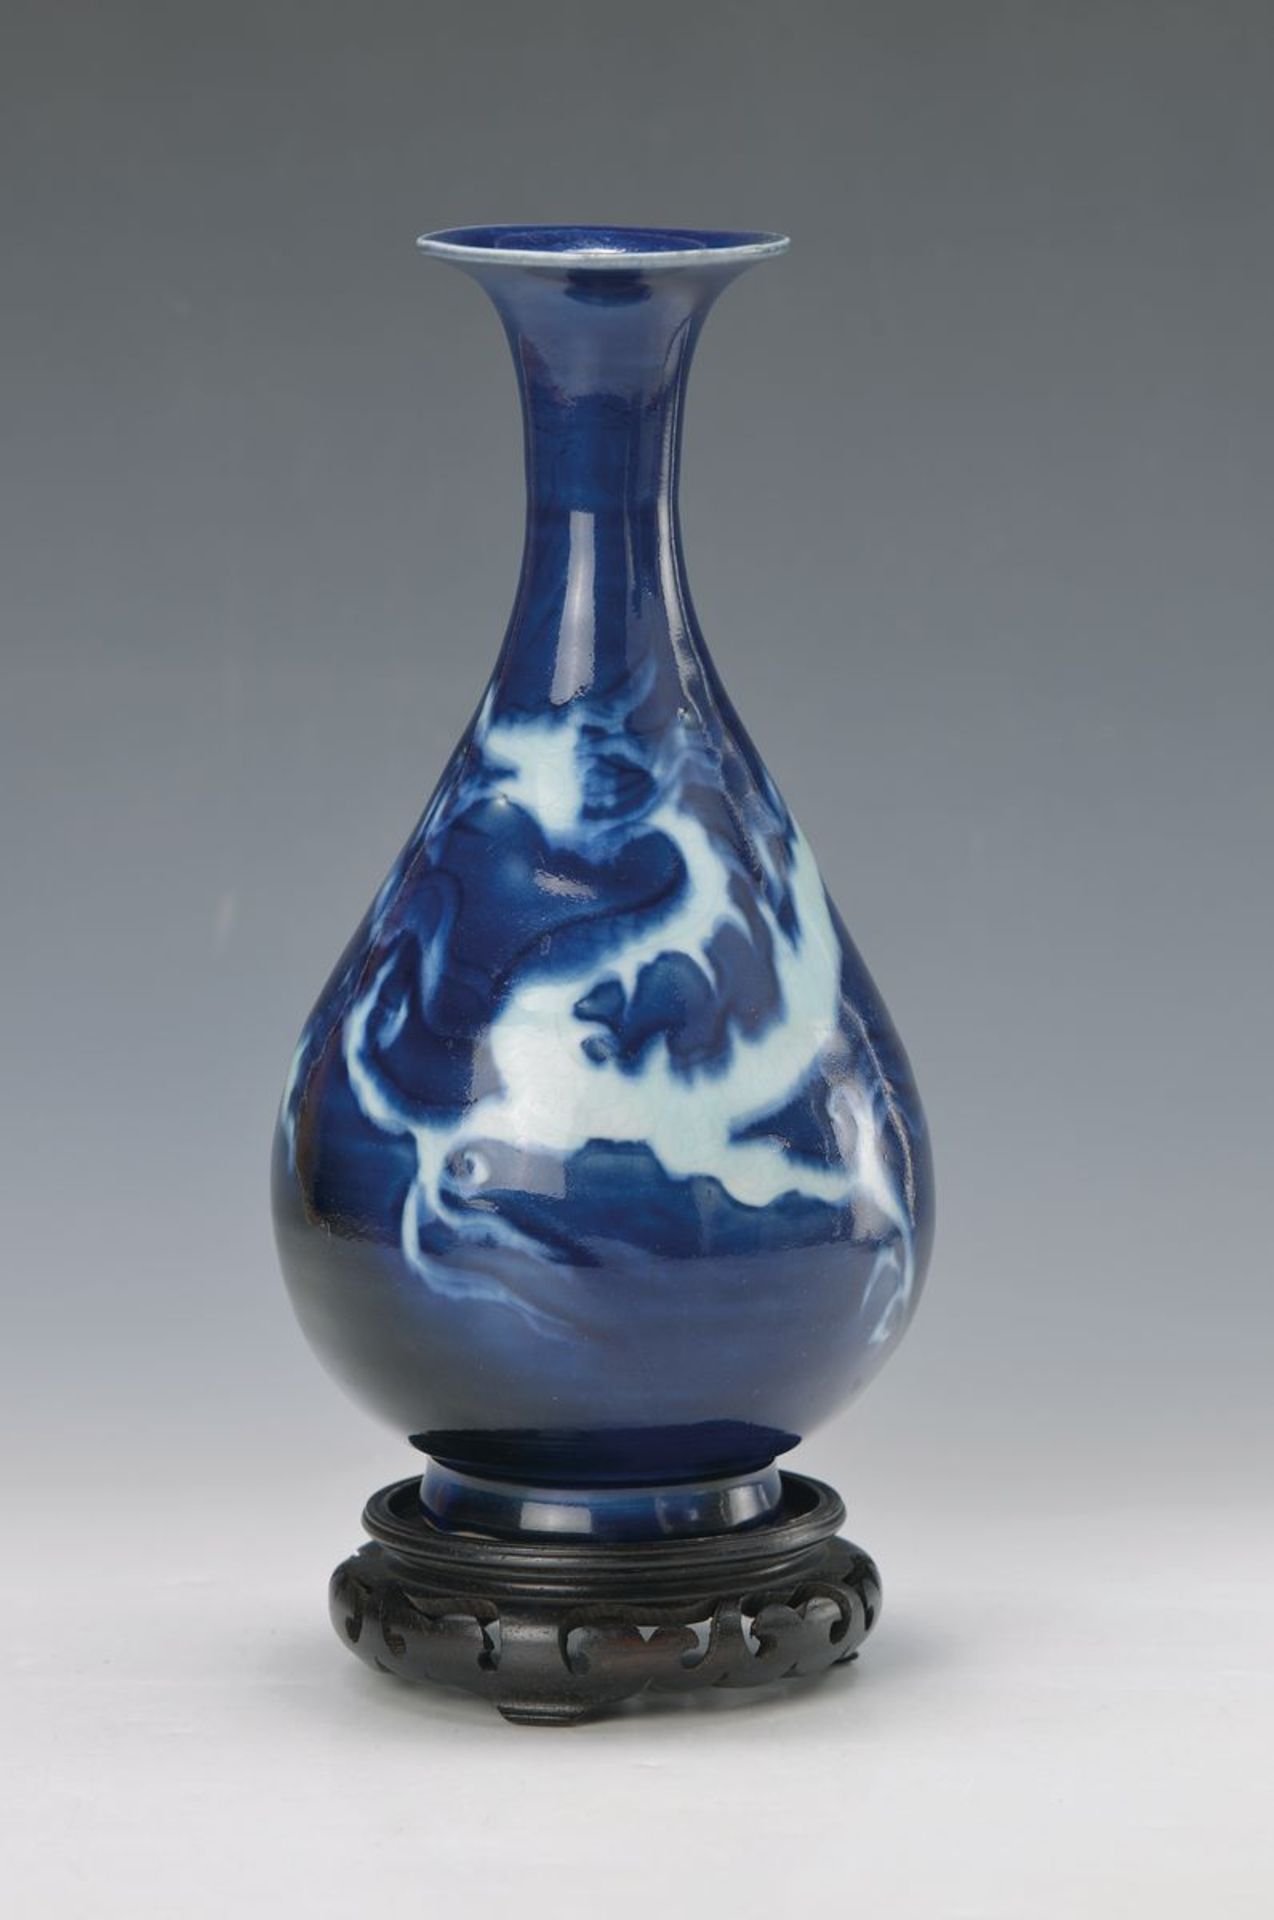 Baluster vase, China 18. th c., Transitional period between Ching and Ming, porcelain continuous